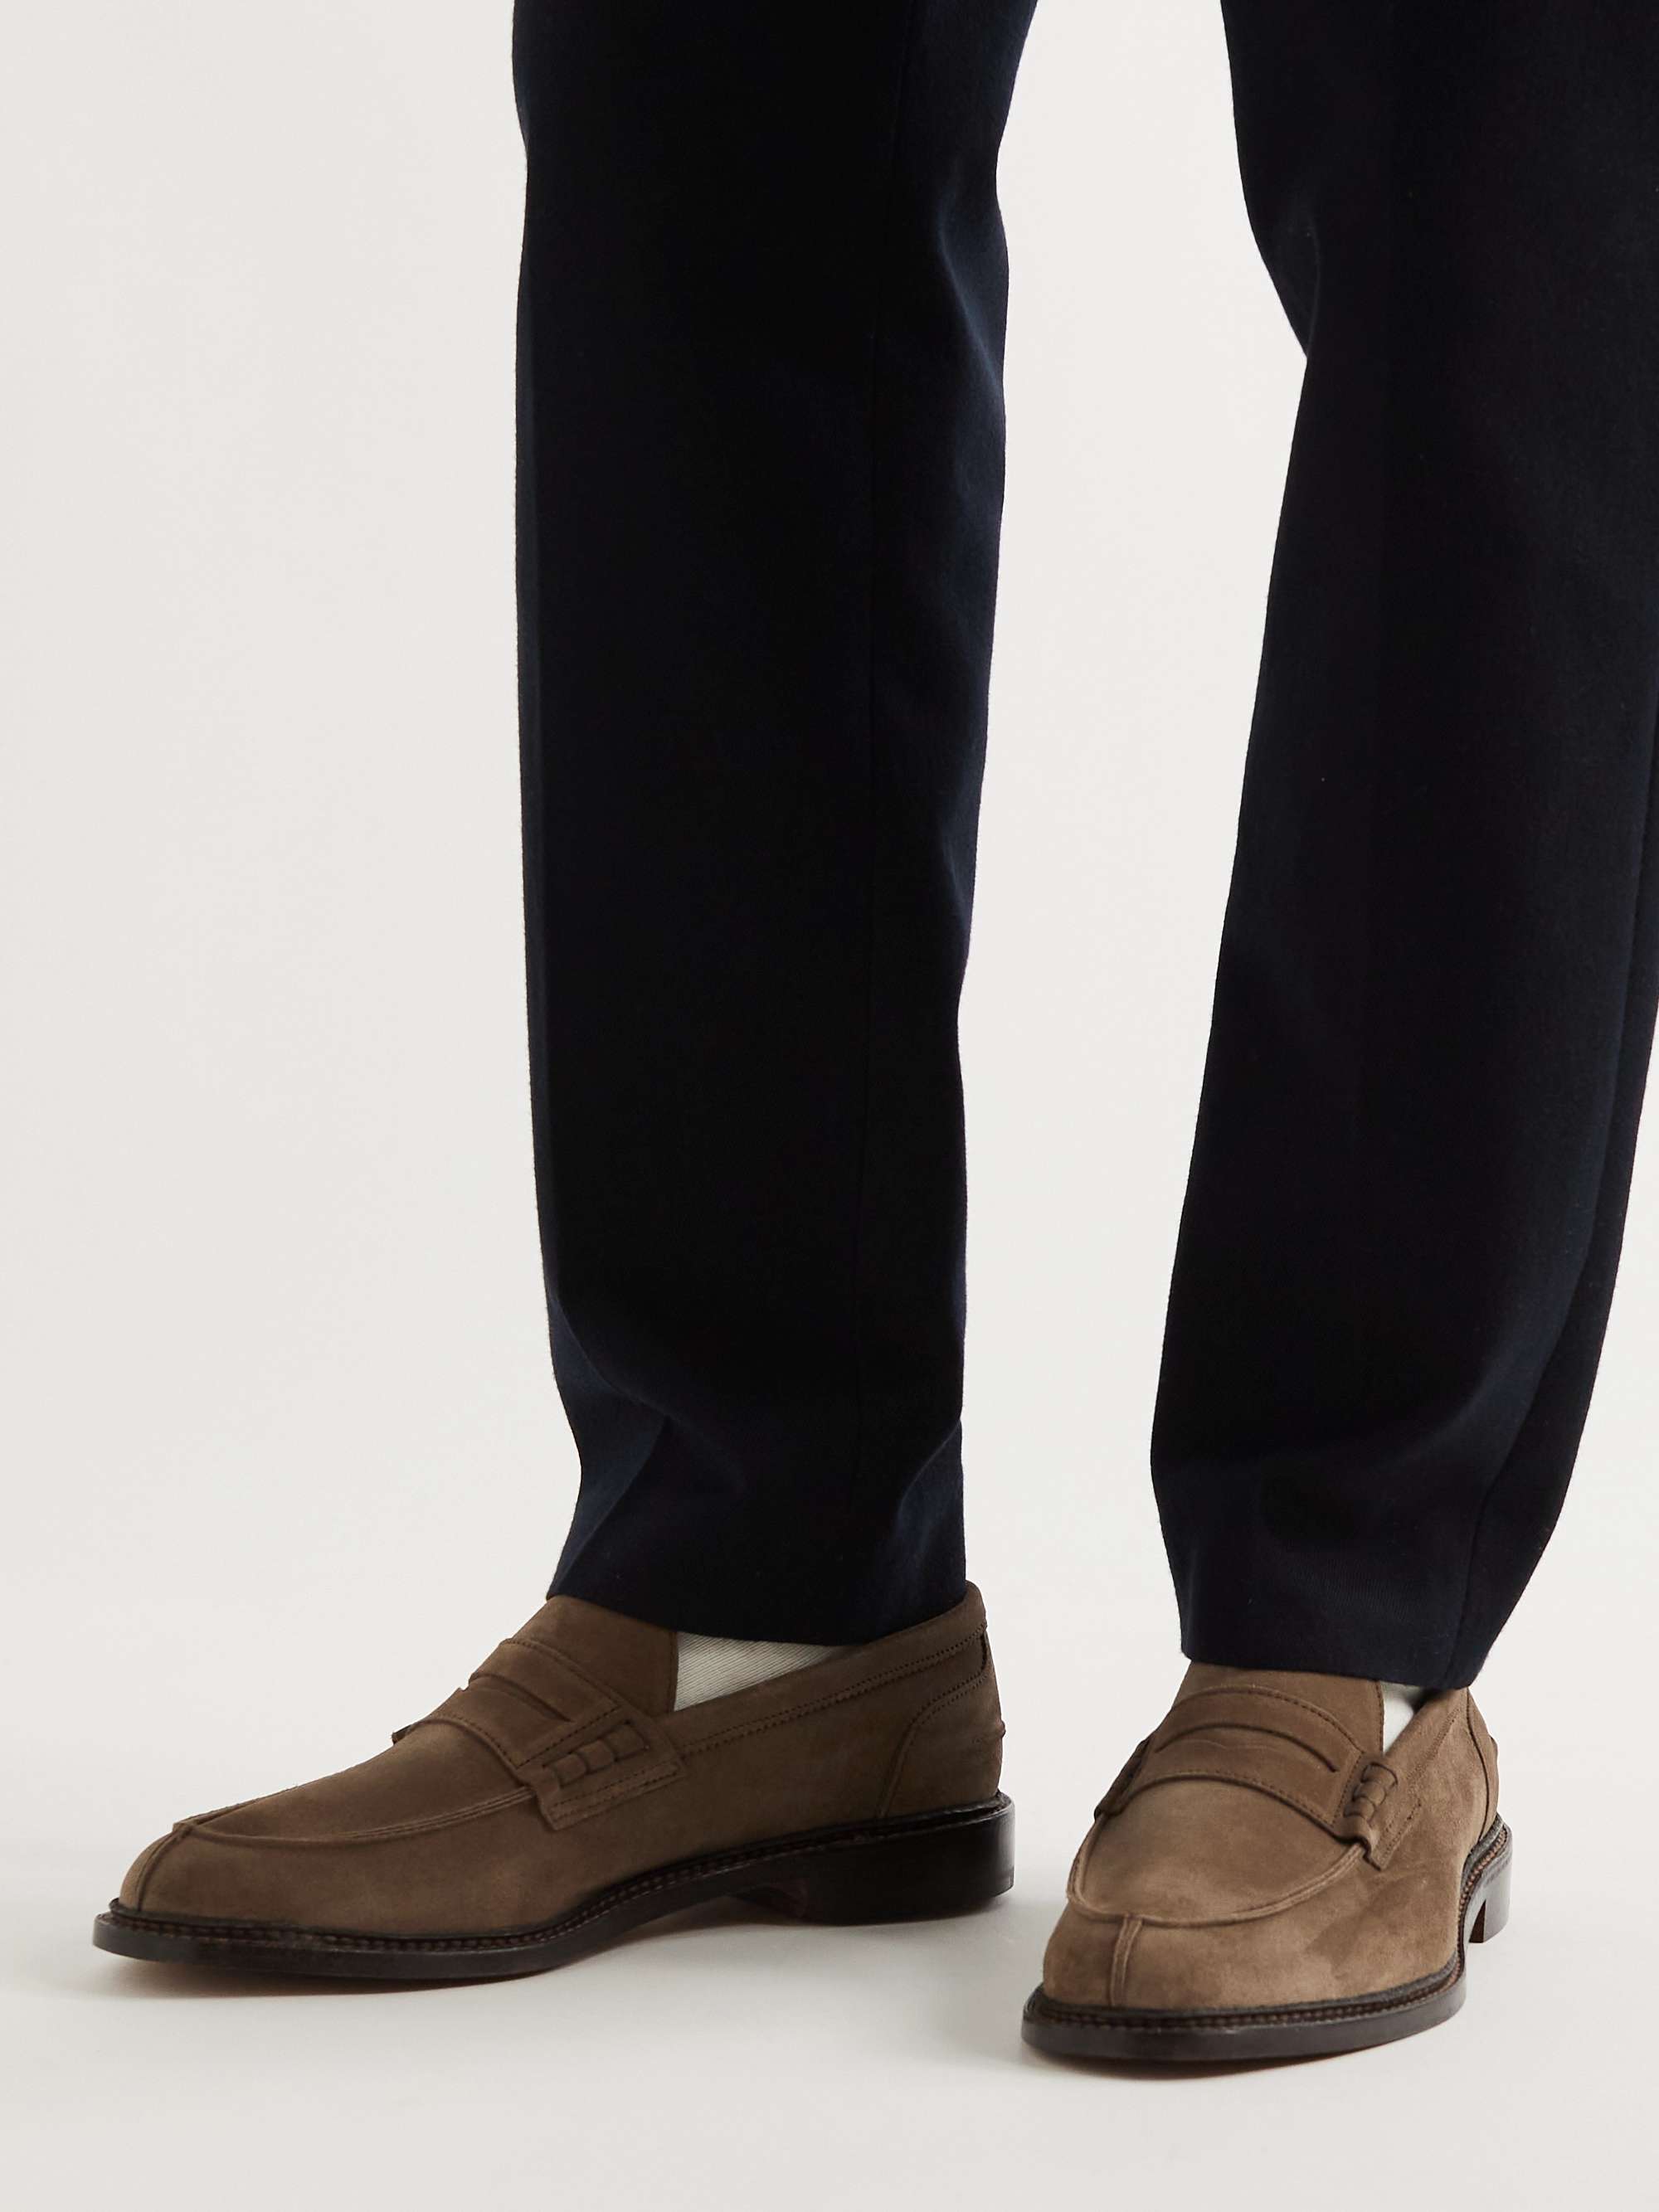 TRICKER'S Adam Suede Penny Loafers